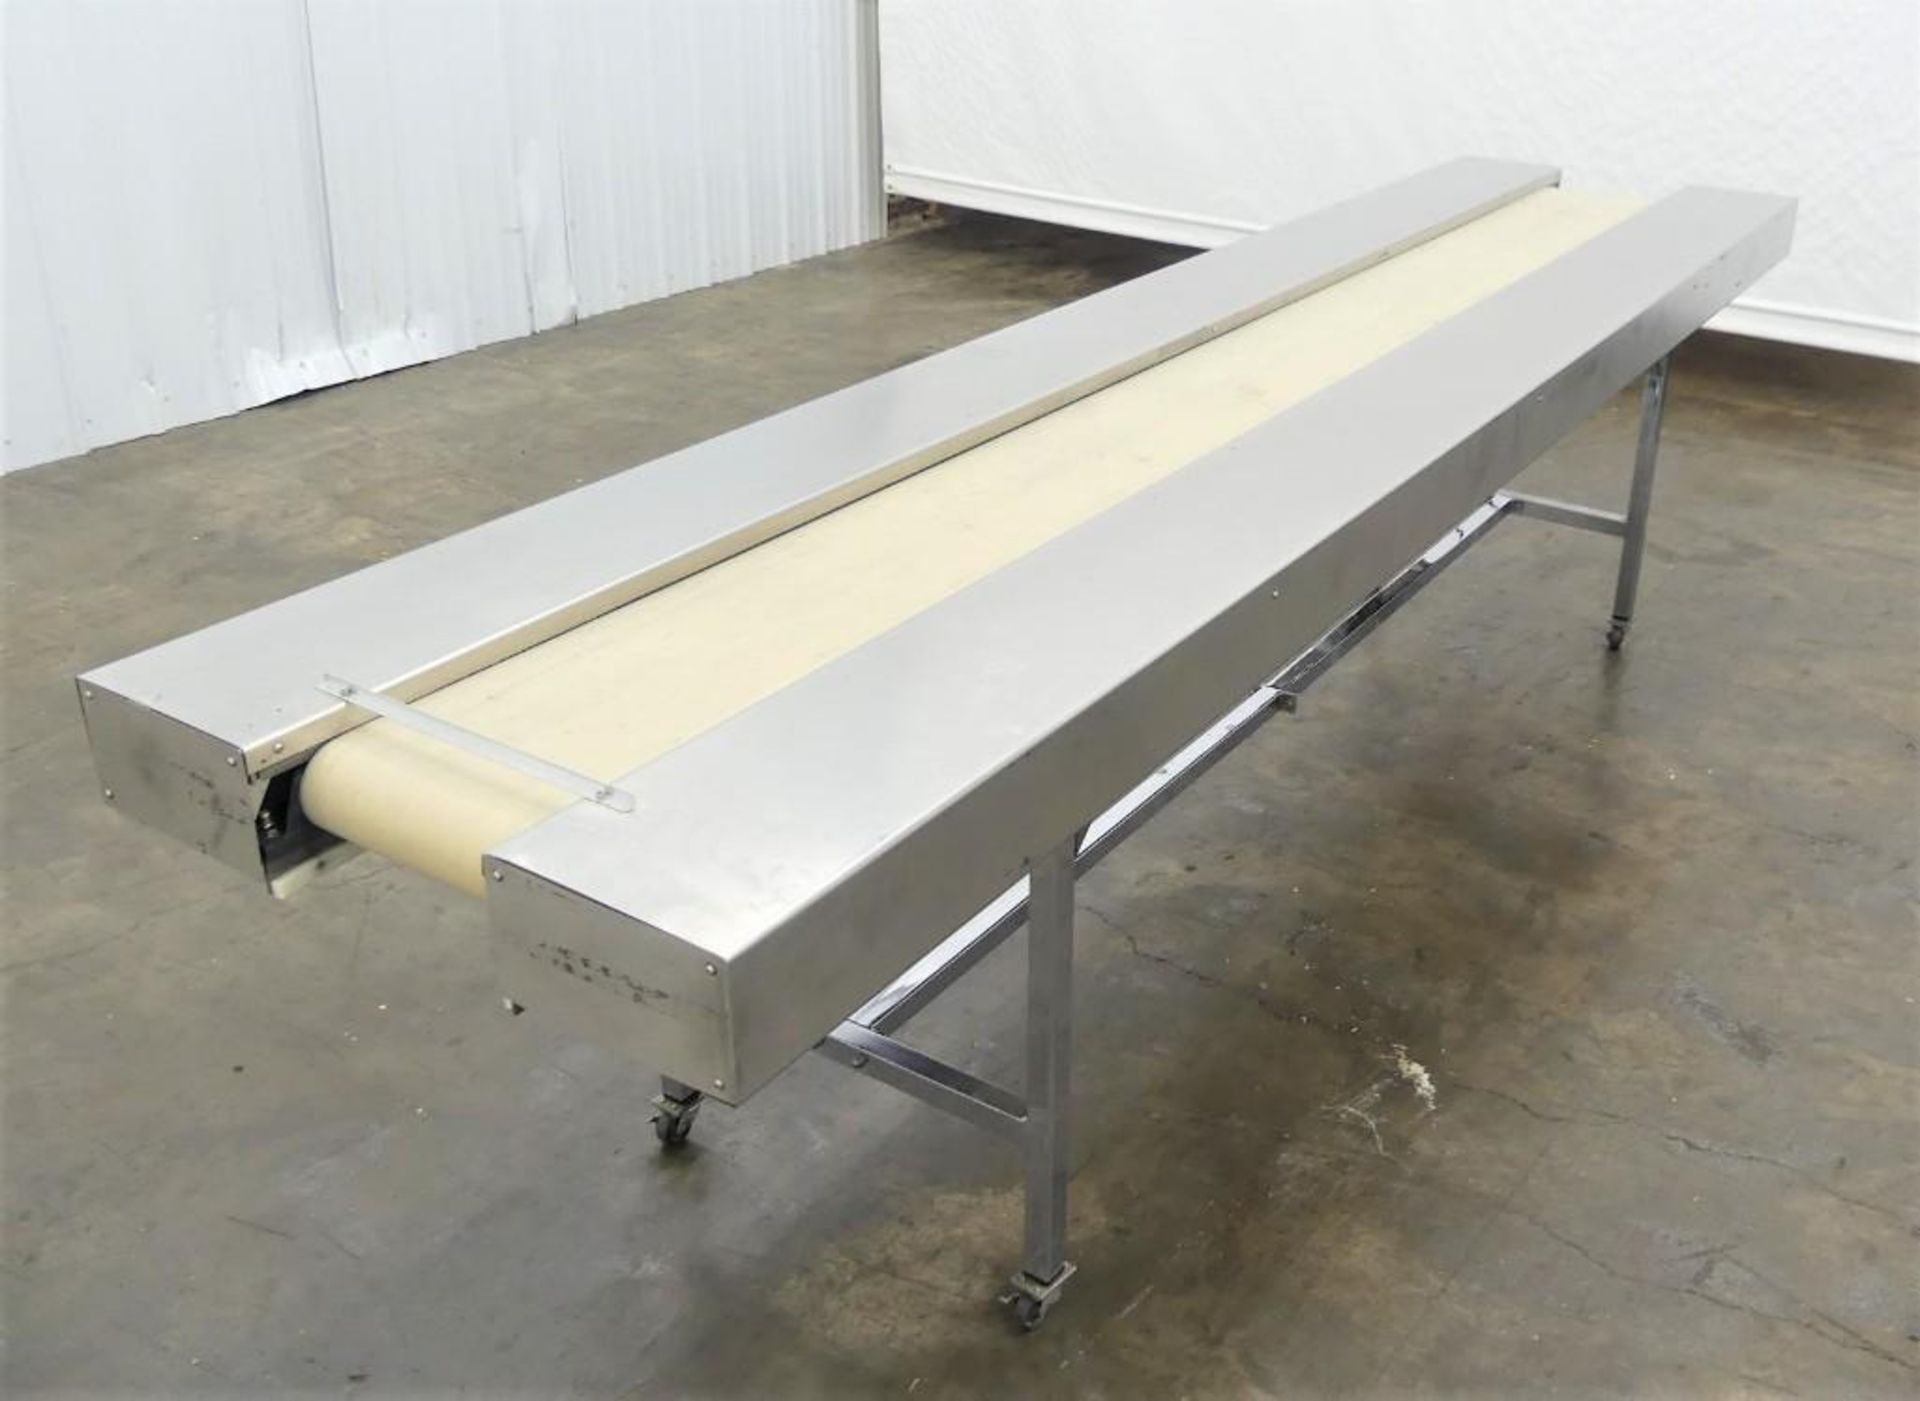 139" by 12" Smooth Top Belt Conveyor - Image 2 of 2